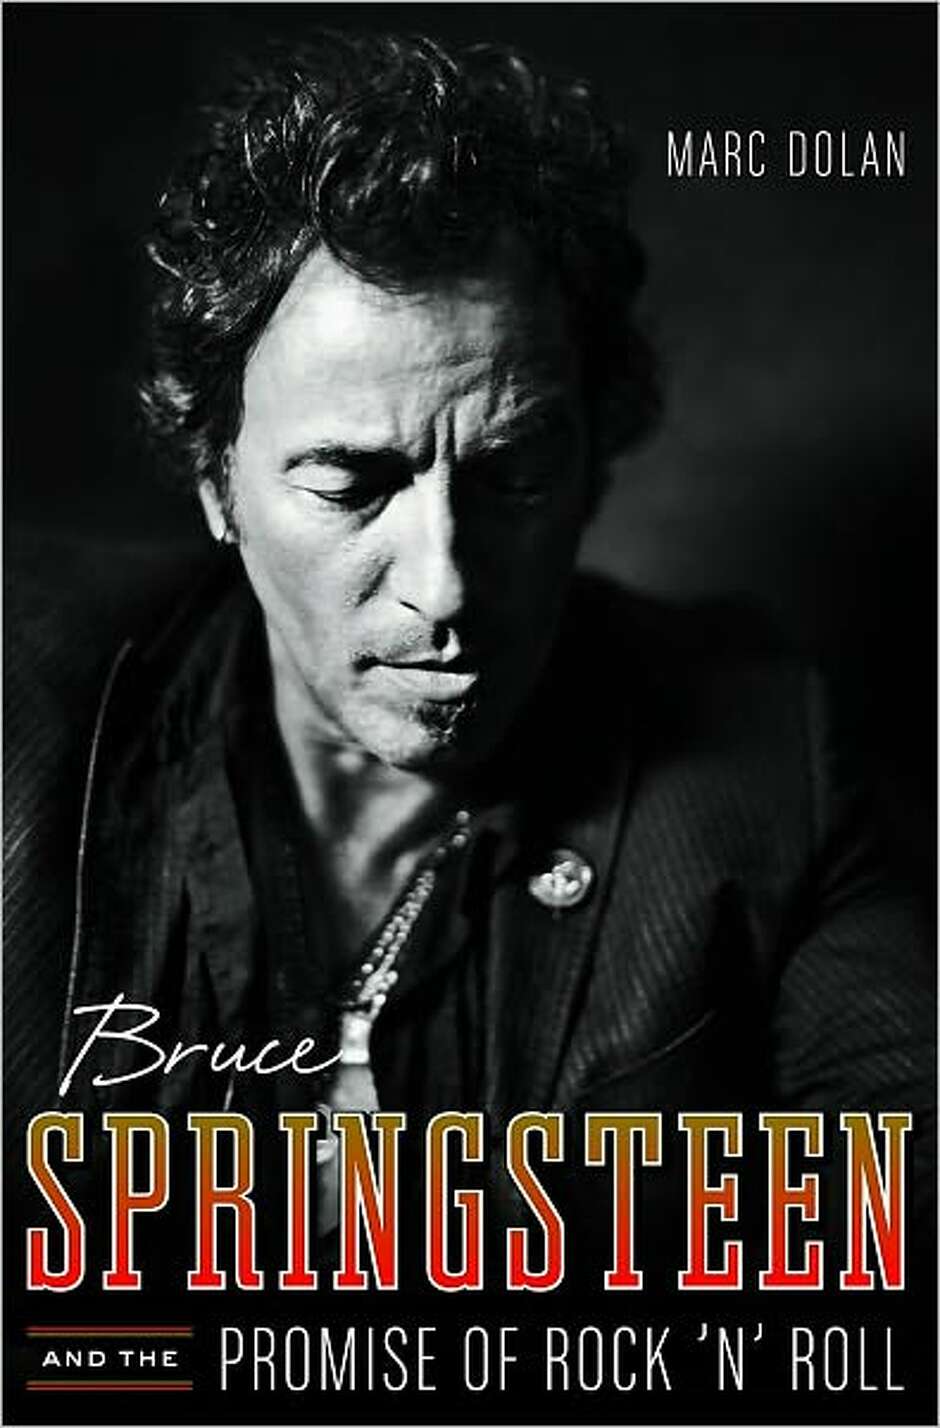 Book review 'Bruce Springsteen and the Promise of Rock 'n' Roll